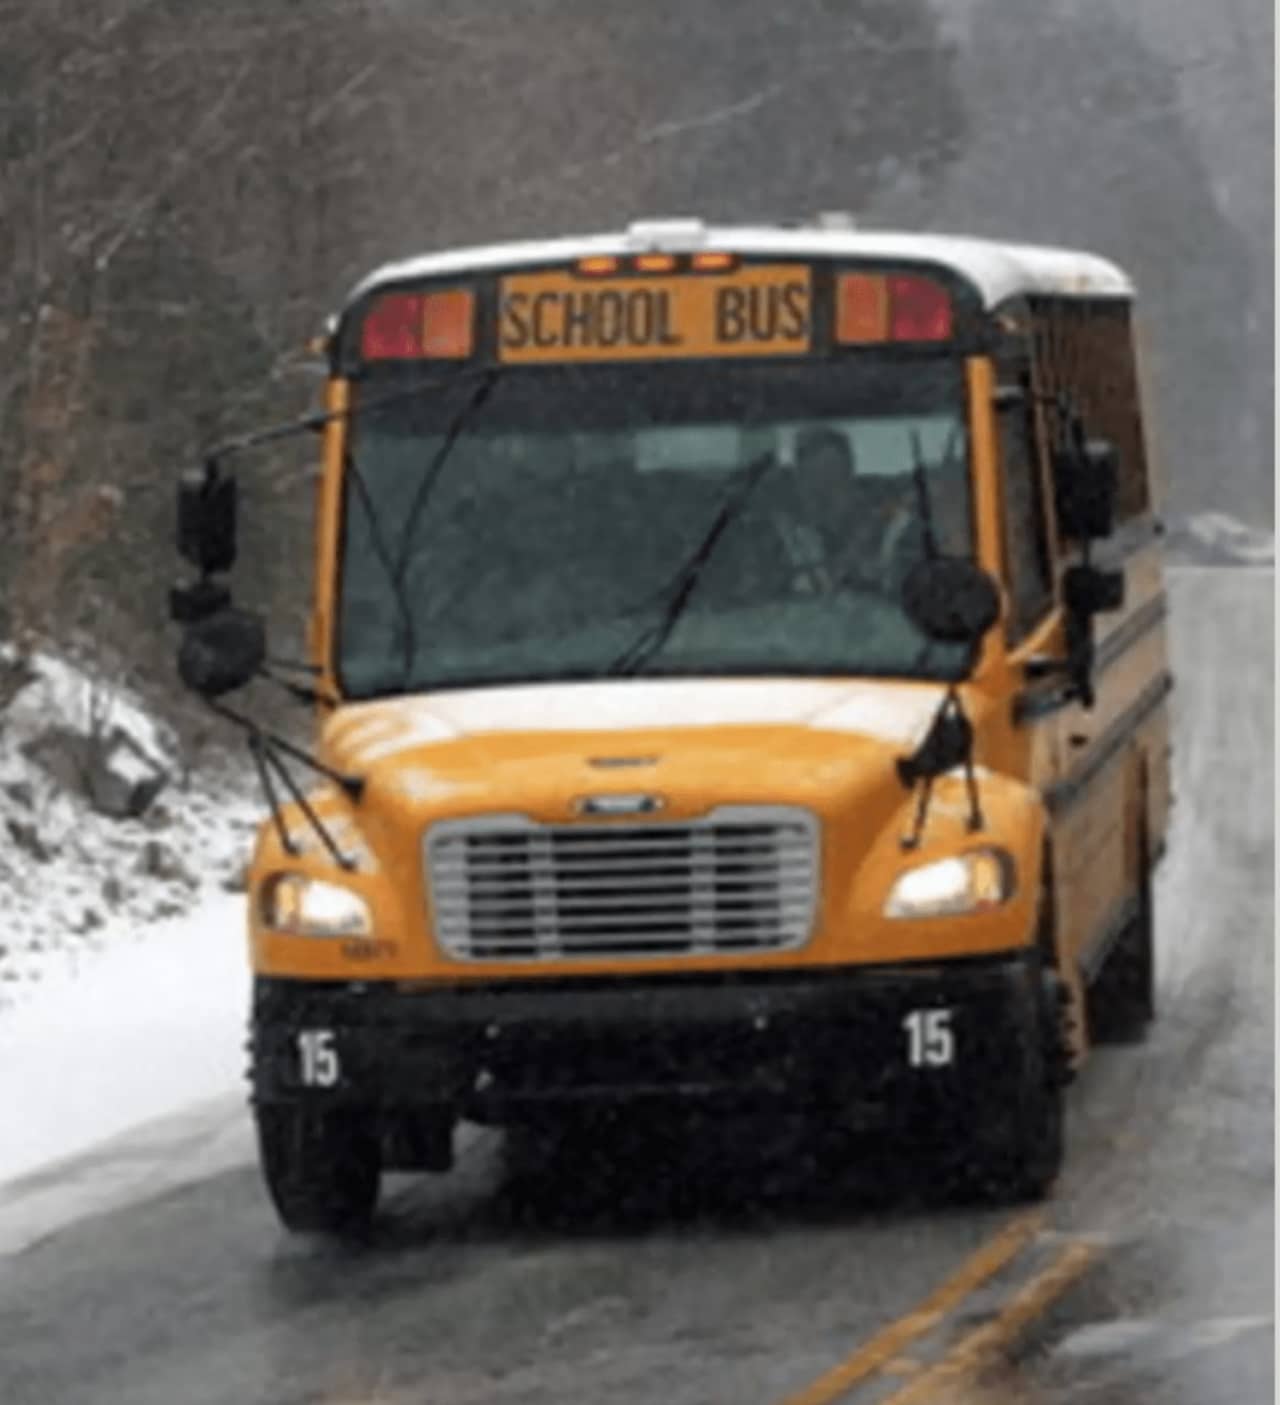 The following schools and school districts in the area have announced closures and delayed starts for Friday, Jan. 5.